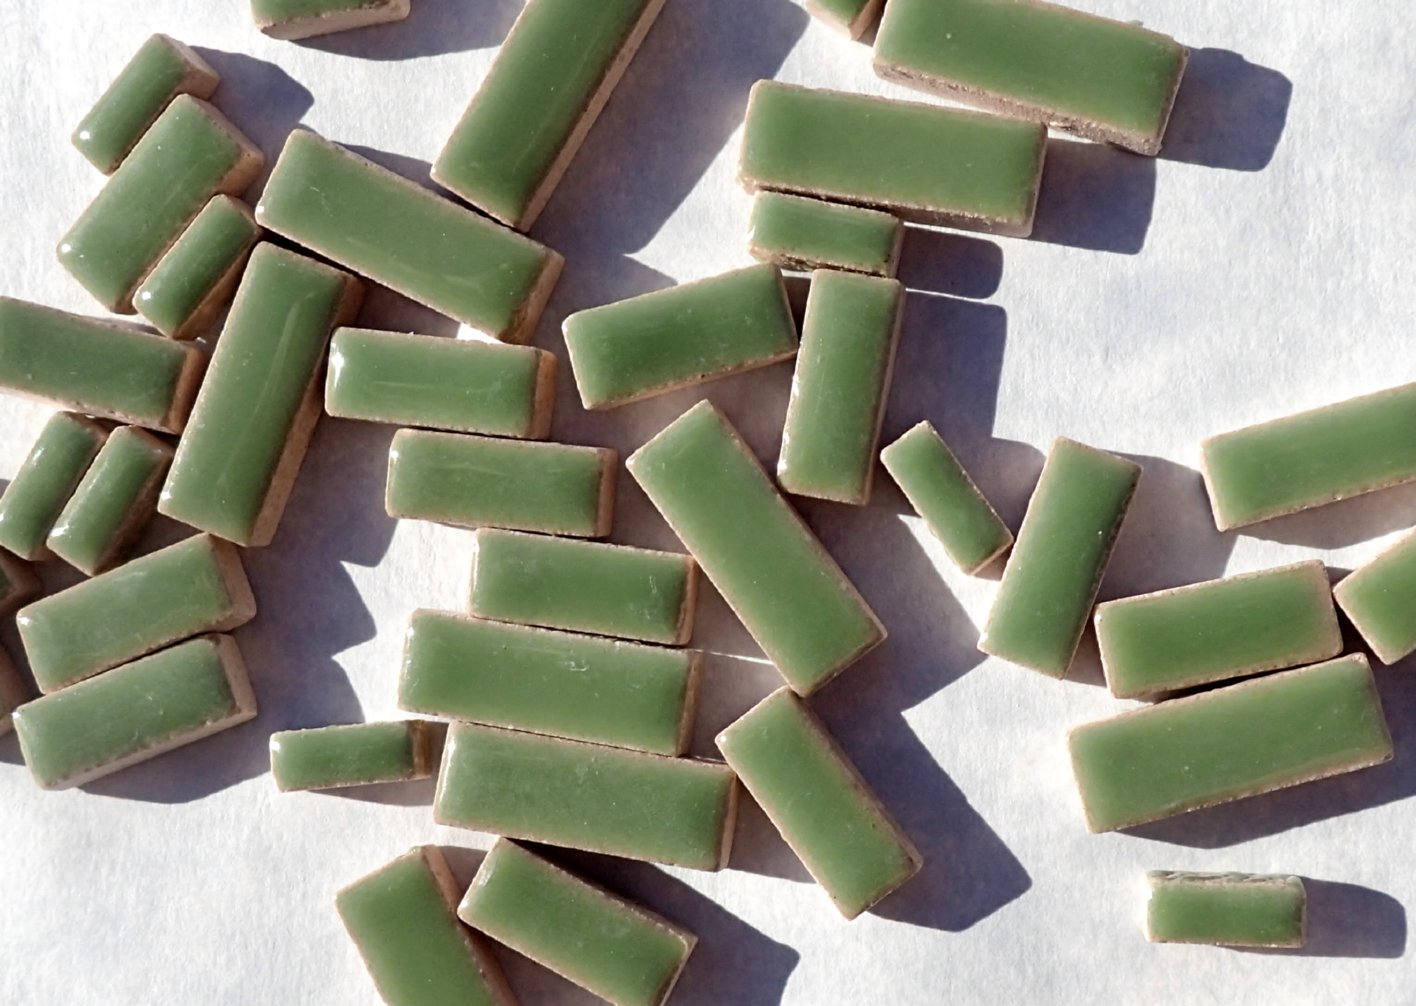 Jade Green Mini Rectangles Mosaic Tiles - 50g Ceramic in Mix of 3 Sizes 1/2" and 3/4"